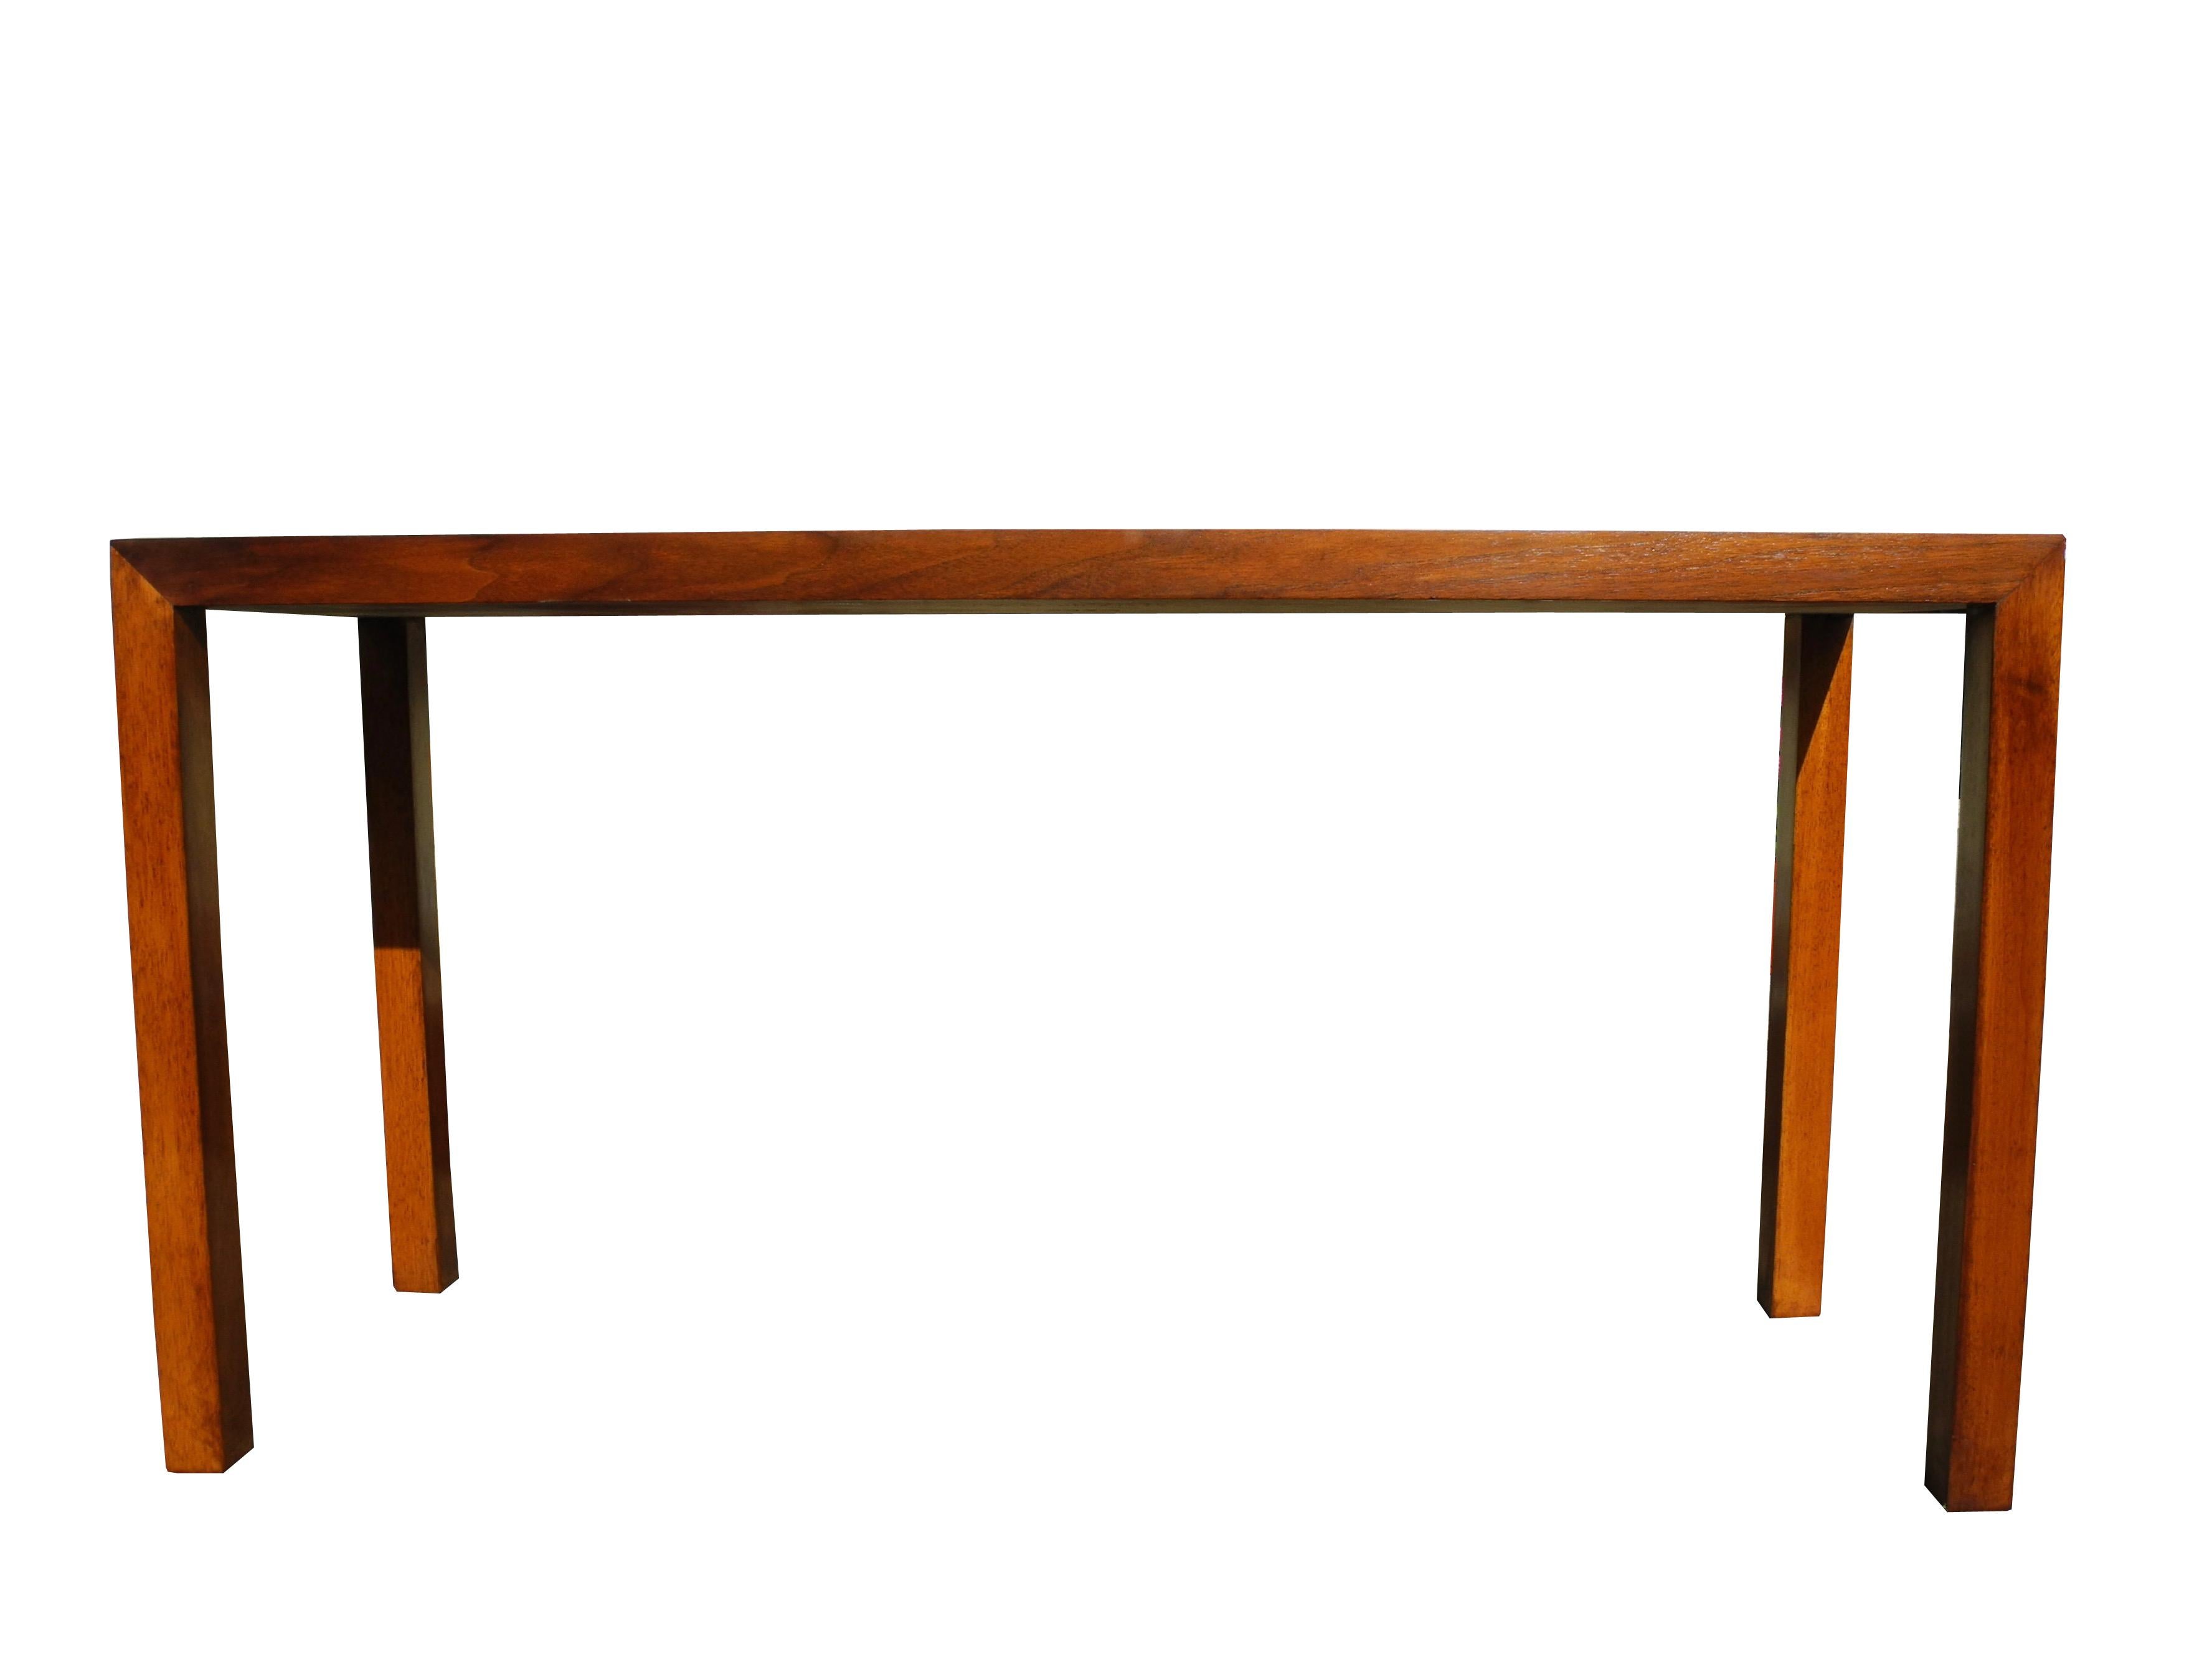 American Mid-Century Modern Parson's Style Walnut Console with Parquet Top, 1950s For Sale